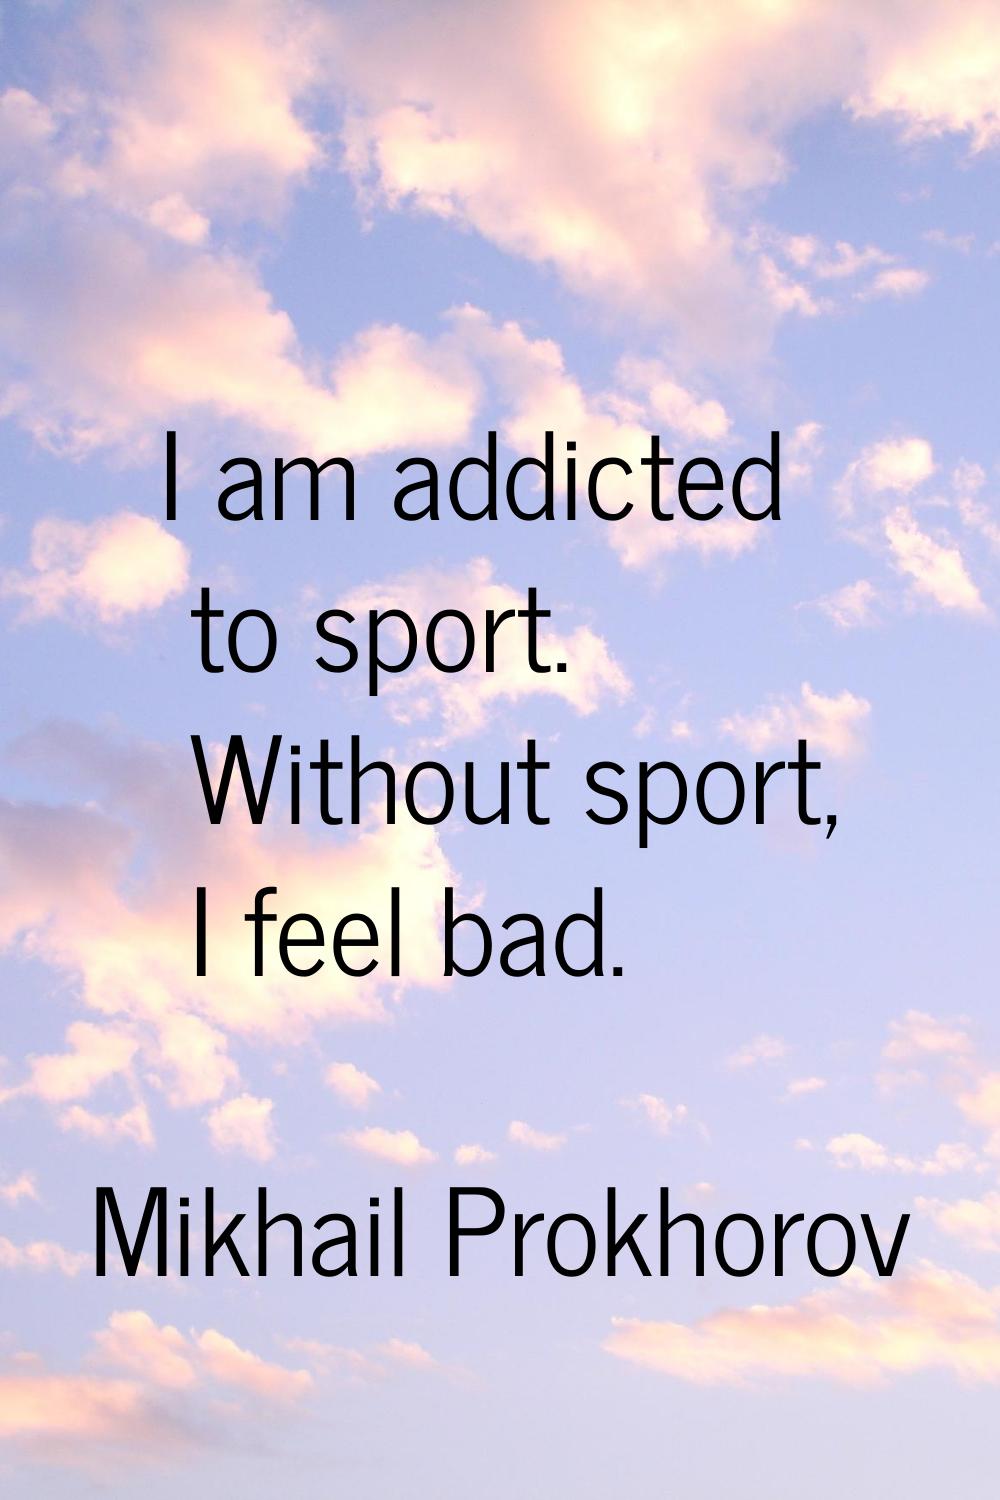 I am addicted to sport. Without sport, I feel bad.